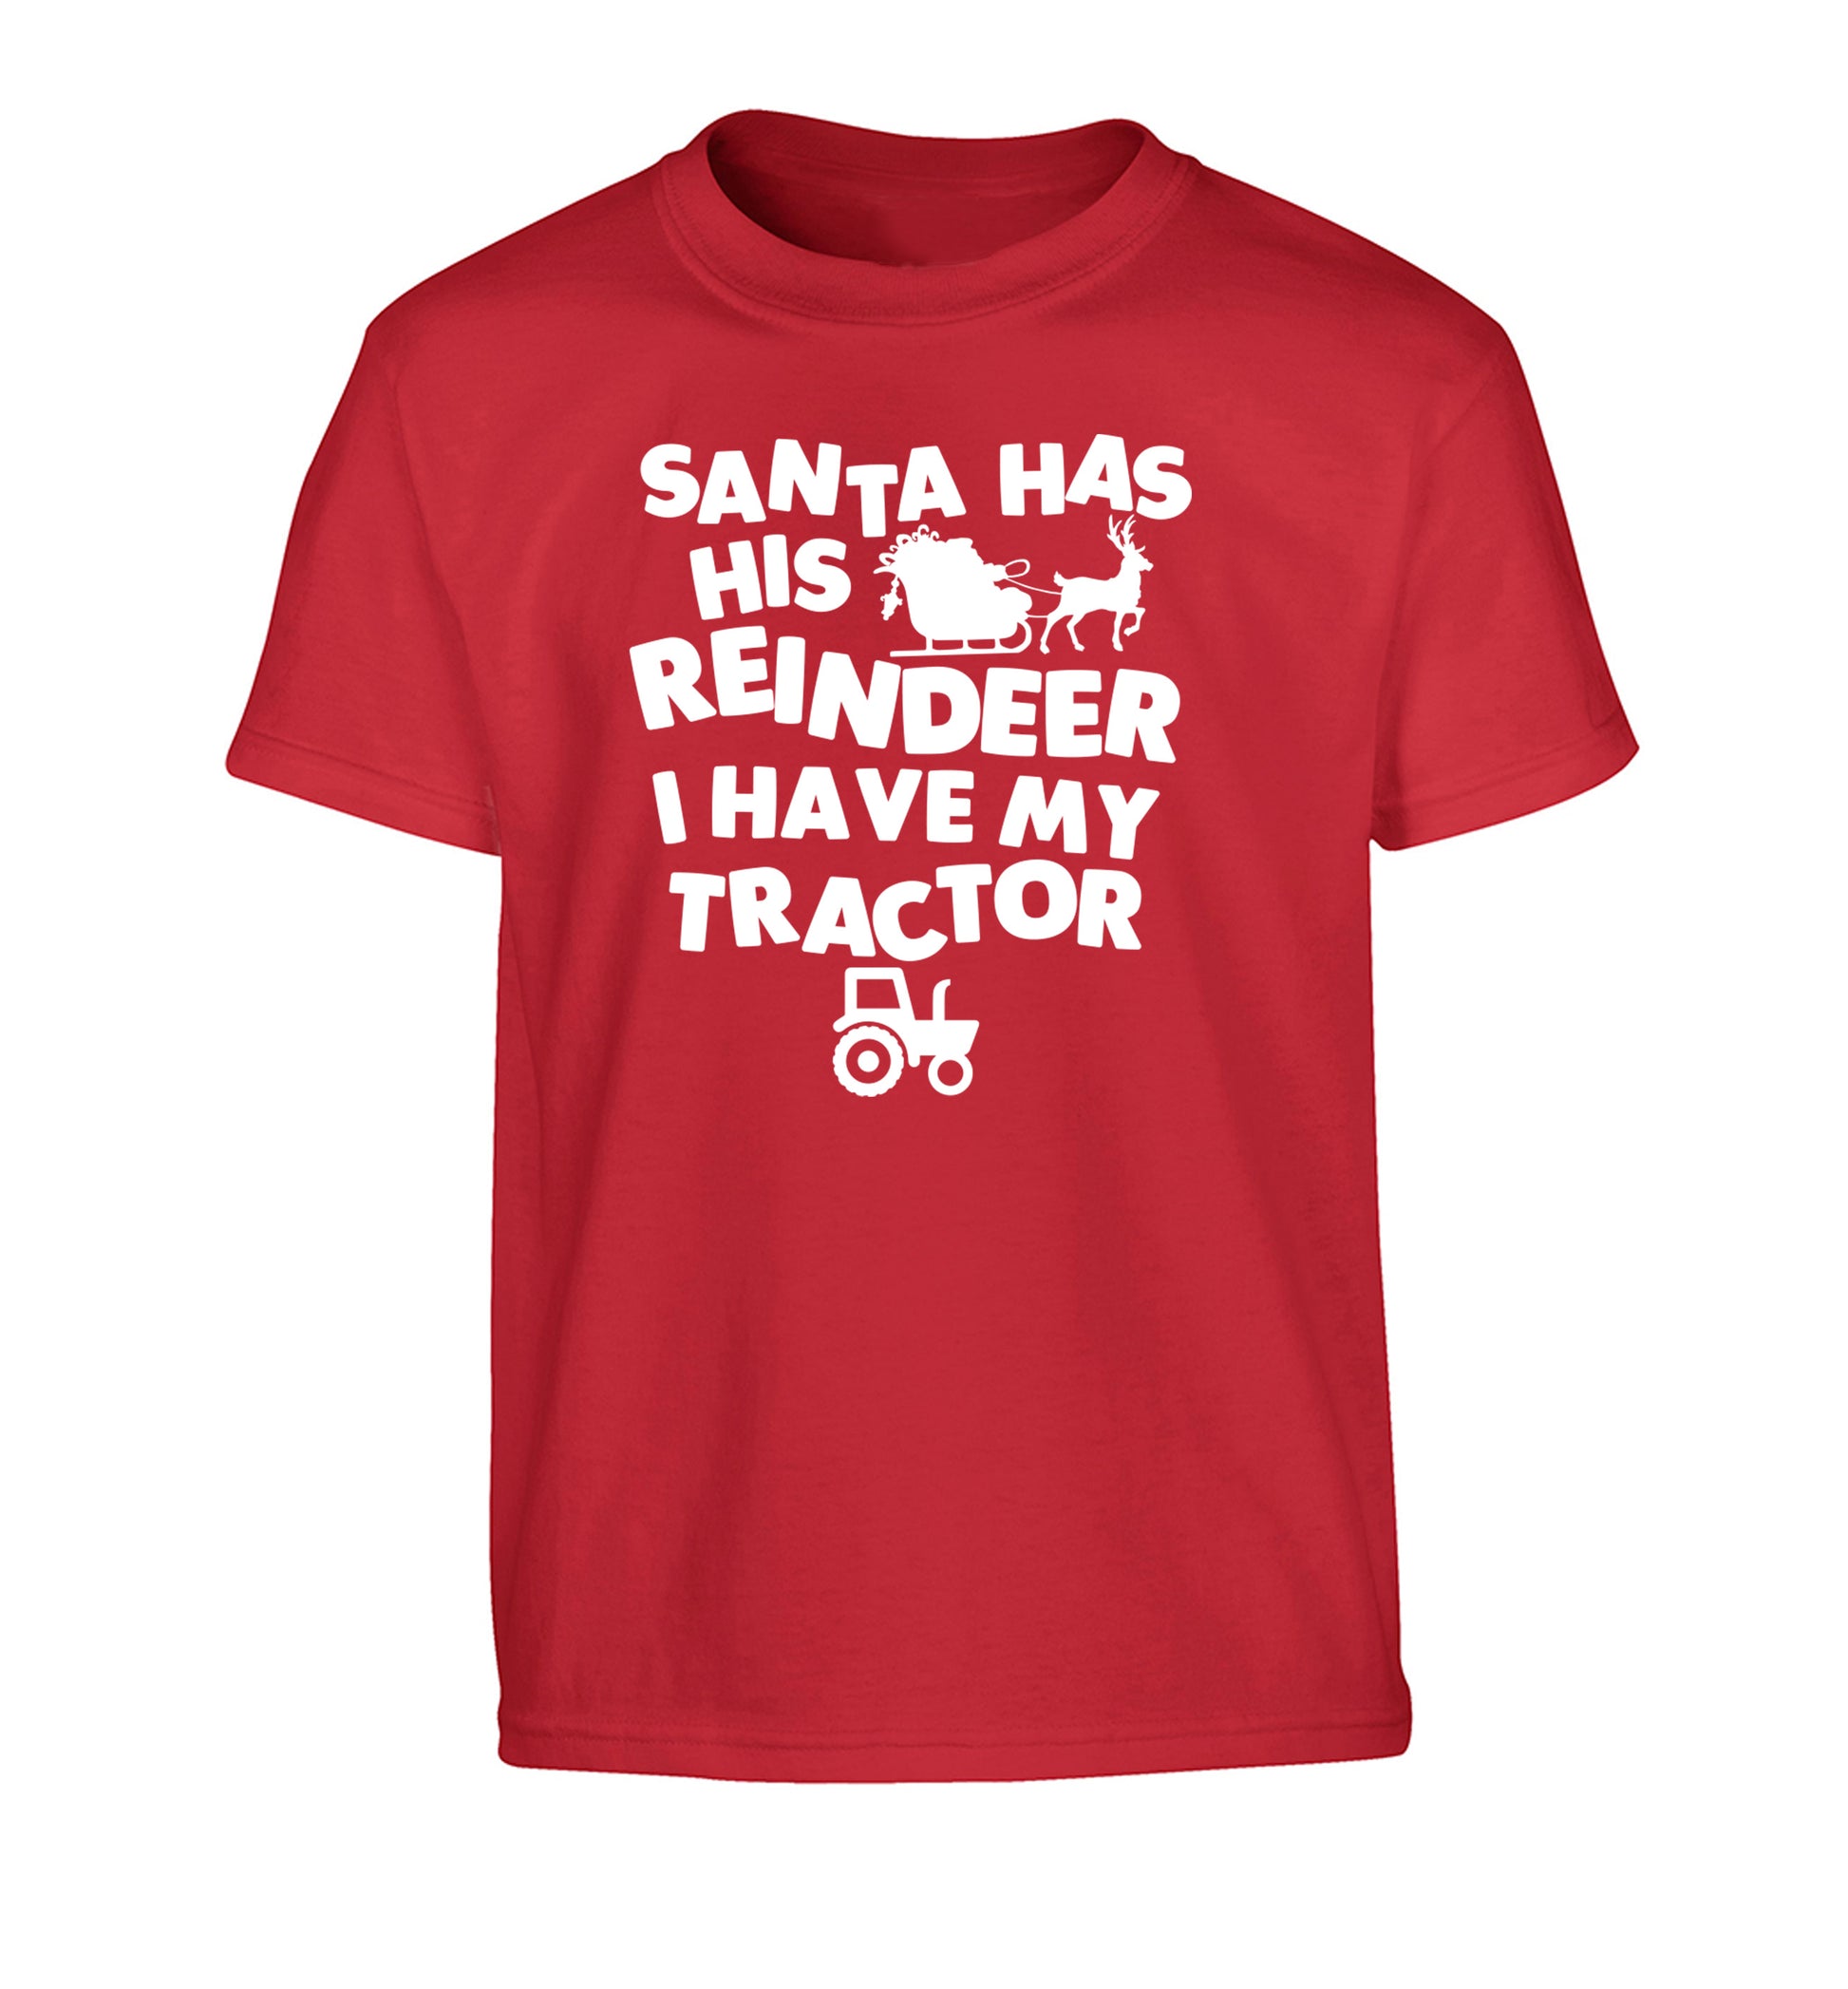 Santa has his reindeer I have my tractor Children's red Tshirt 12-14 Years